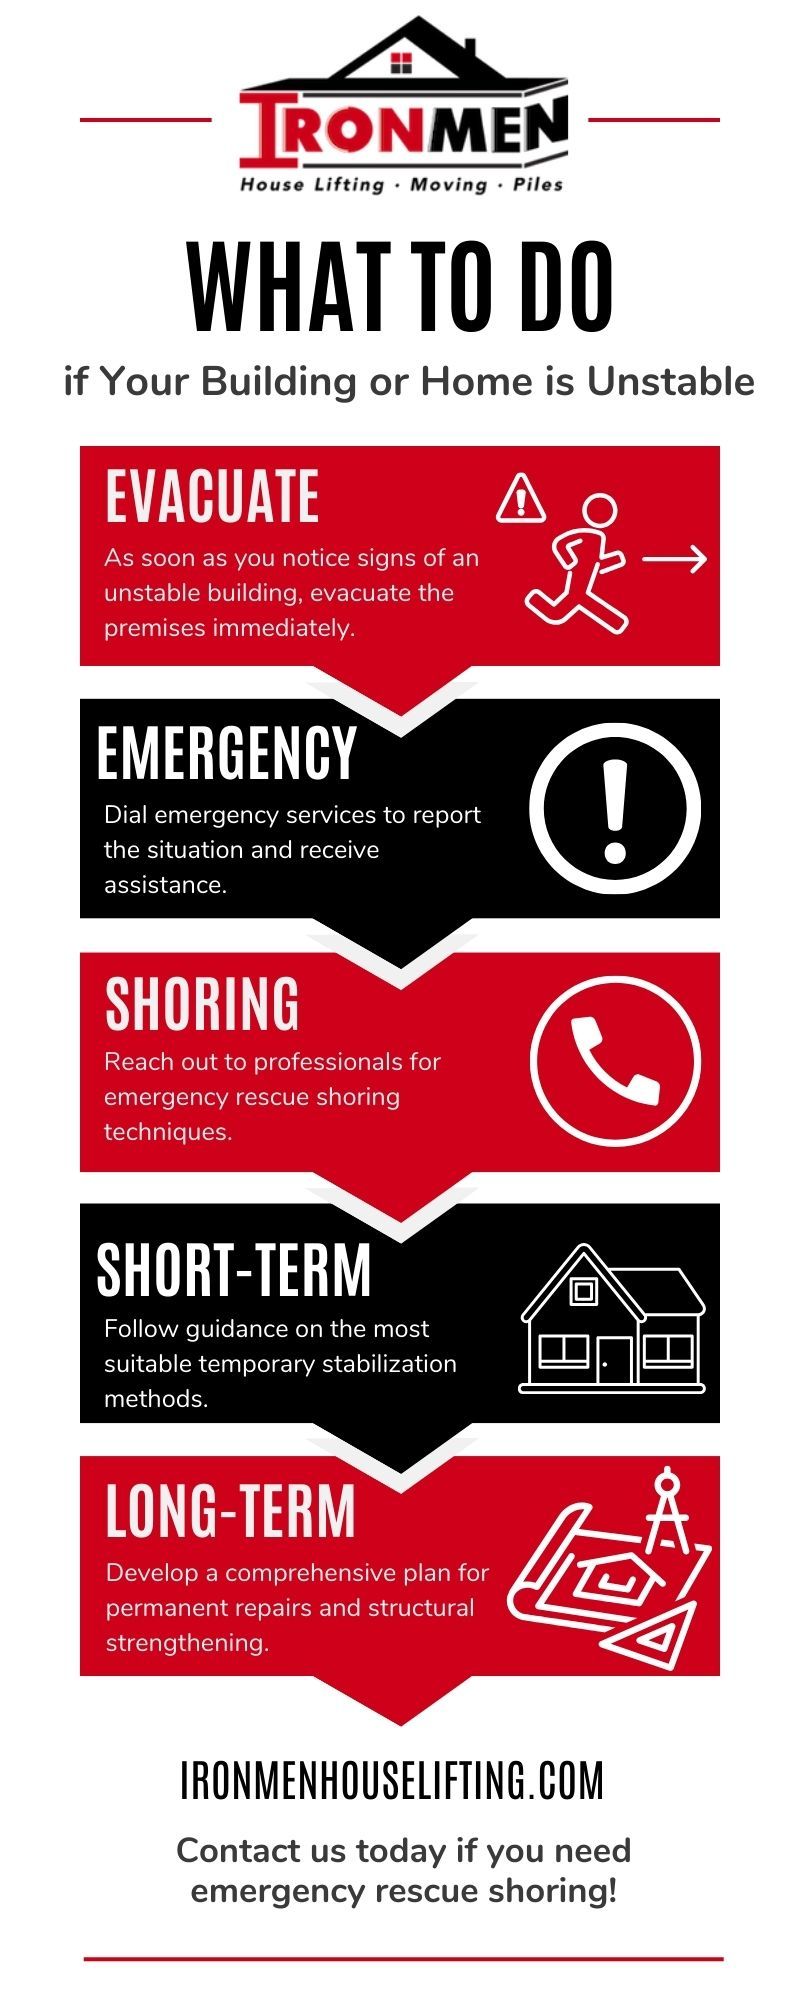 M38760 - Infographic - What to Do if Your Building or Home is Unstable.jpg